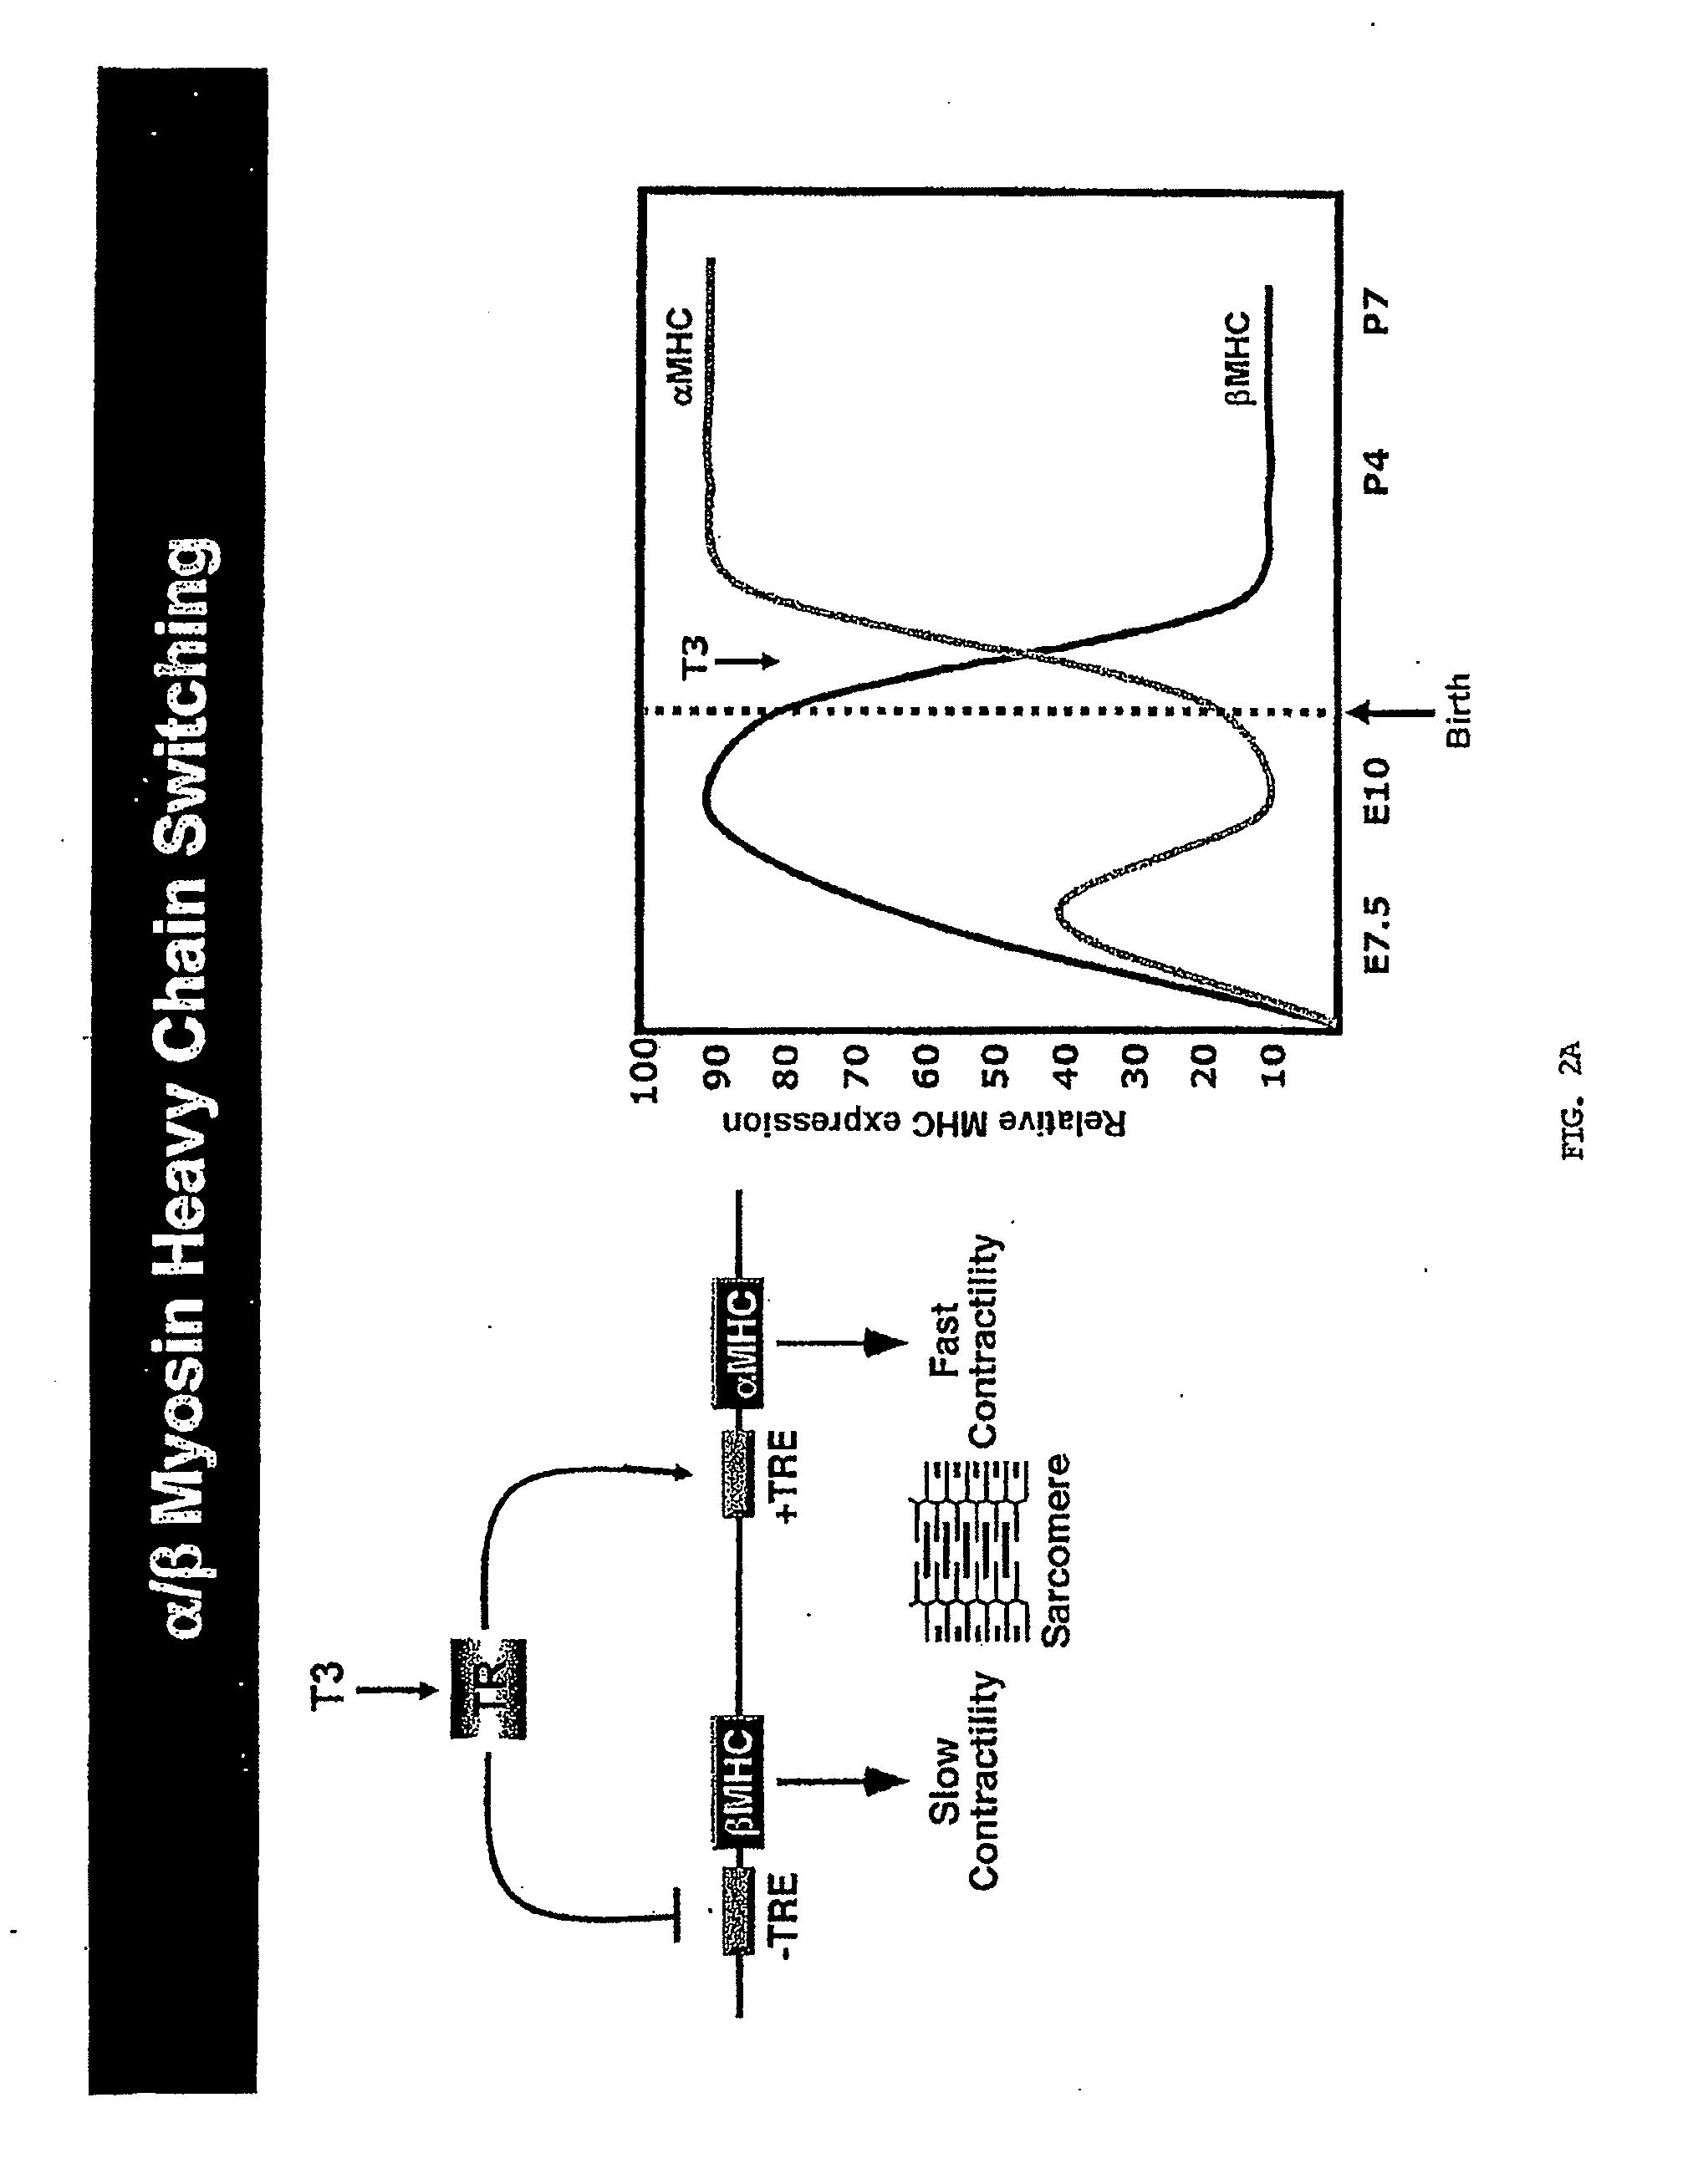 A micro-rna family that modulates fibrosis and uses thereof